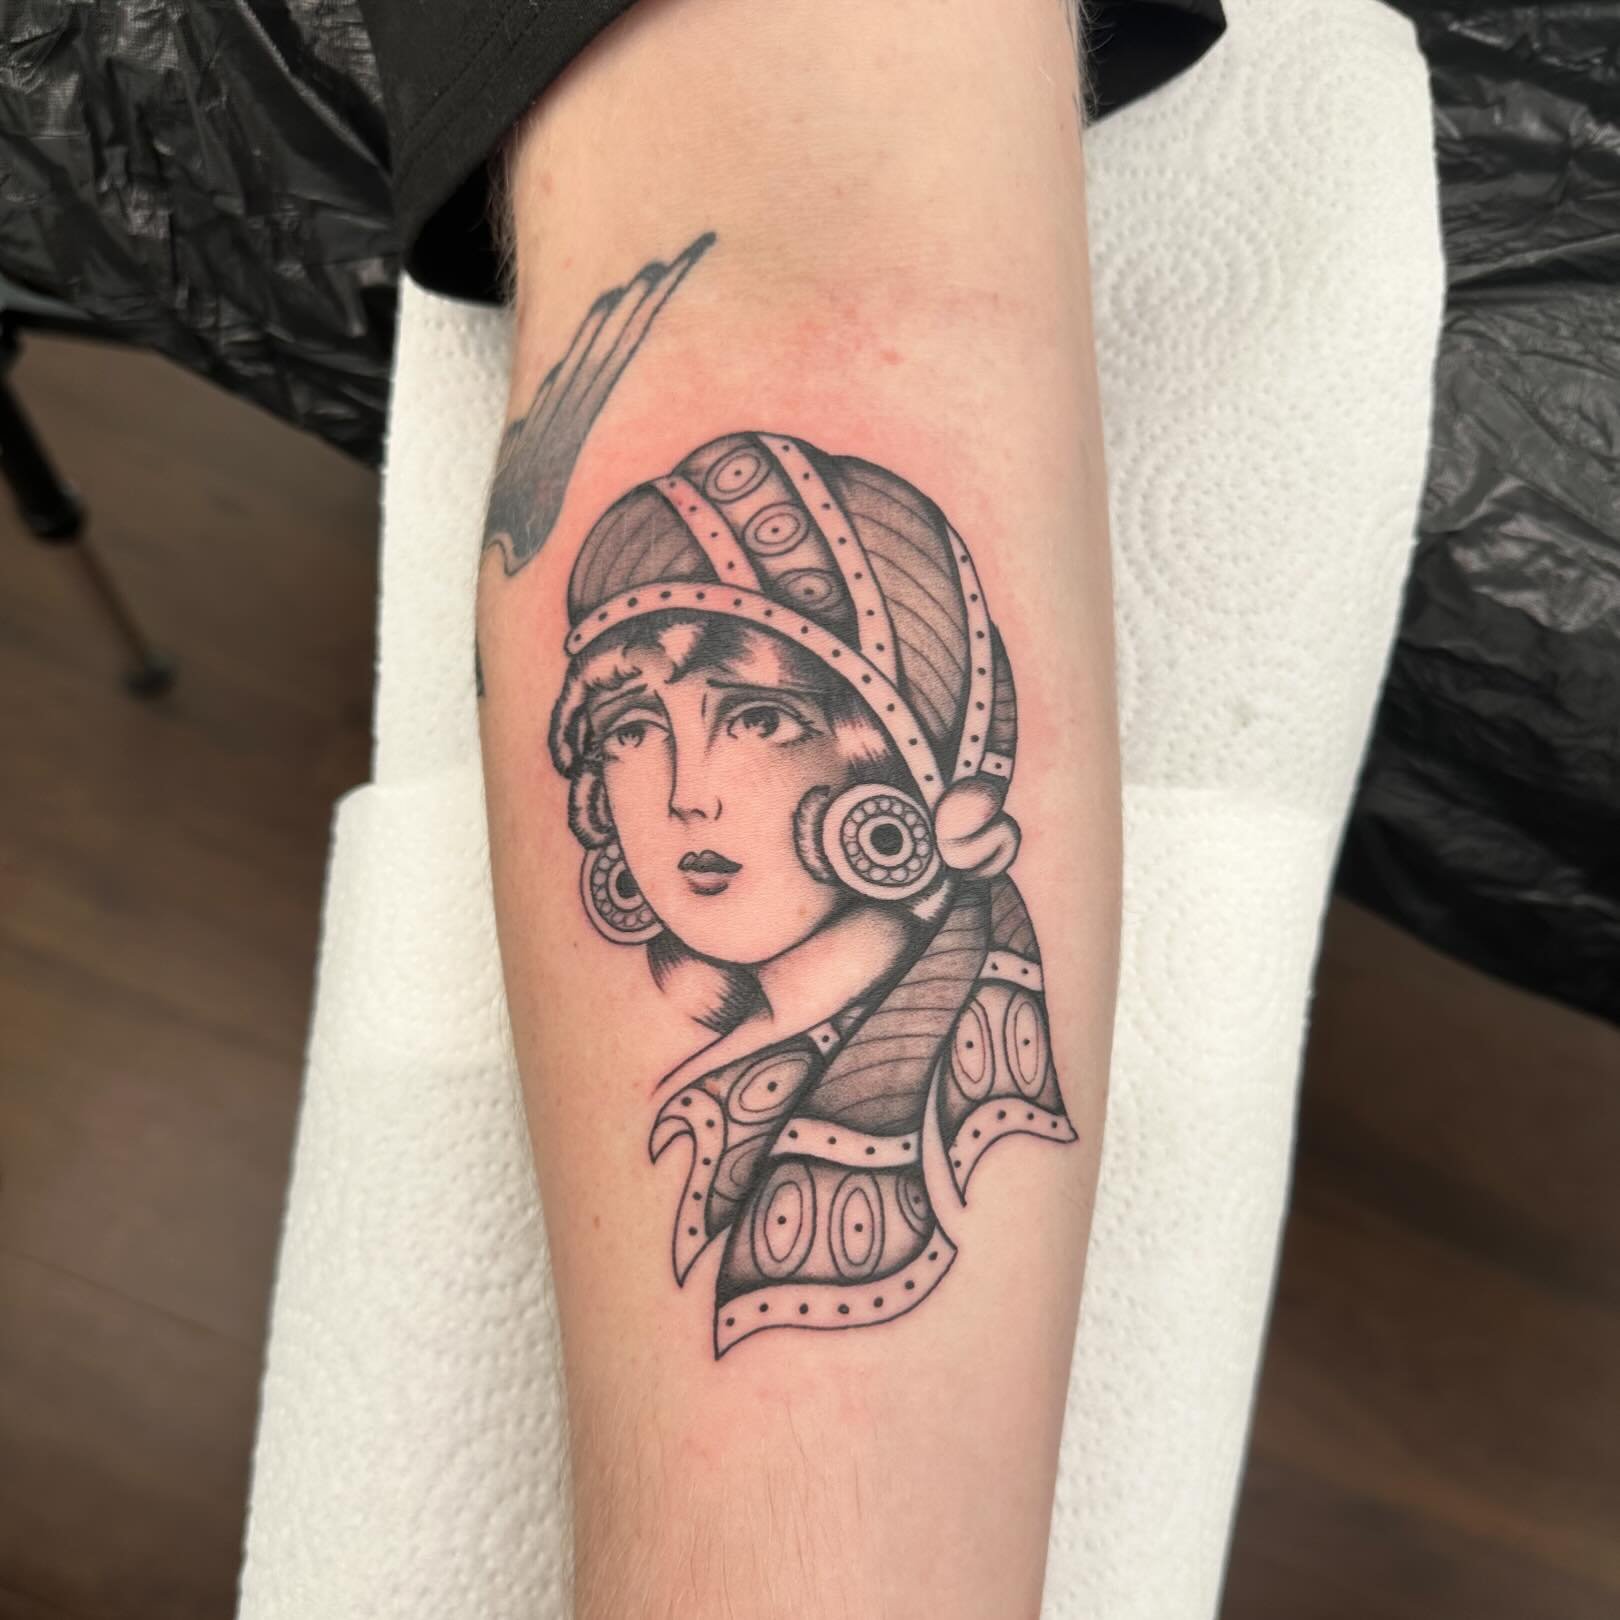 ❤️LADYFACE❤️

Thank you Max for the Trust❤️❤️
With Love Chelly❤️
My books are open!!
Dm me if your interested 
Find me @noble_tattoo

.
.
.
.
.
.
.
.
.
.
.
.
.
.
.
.
.
.
.
.
.
.
.
.
.
.
.
.
.
.
.
.
.
.
.
.
#tattoo #traditionaltattoo #customtattoo #tr